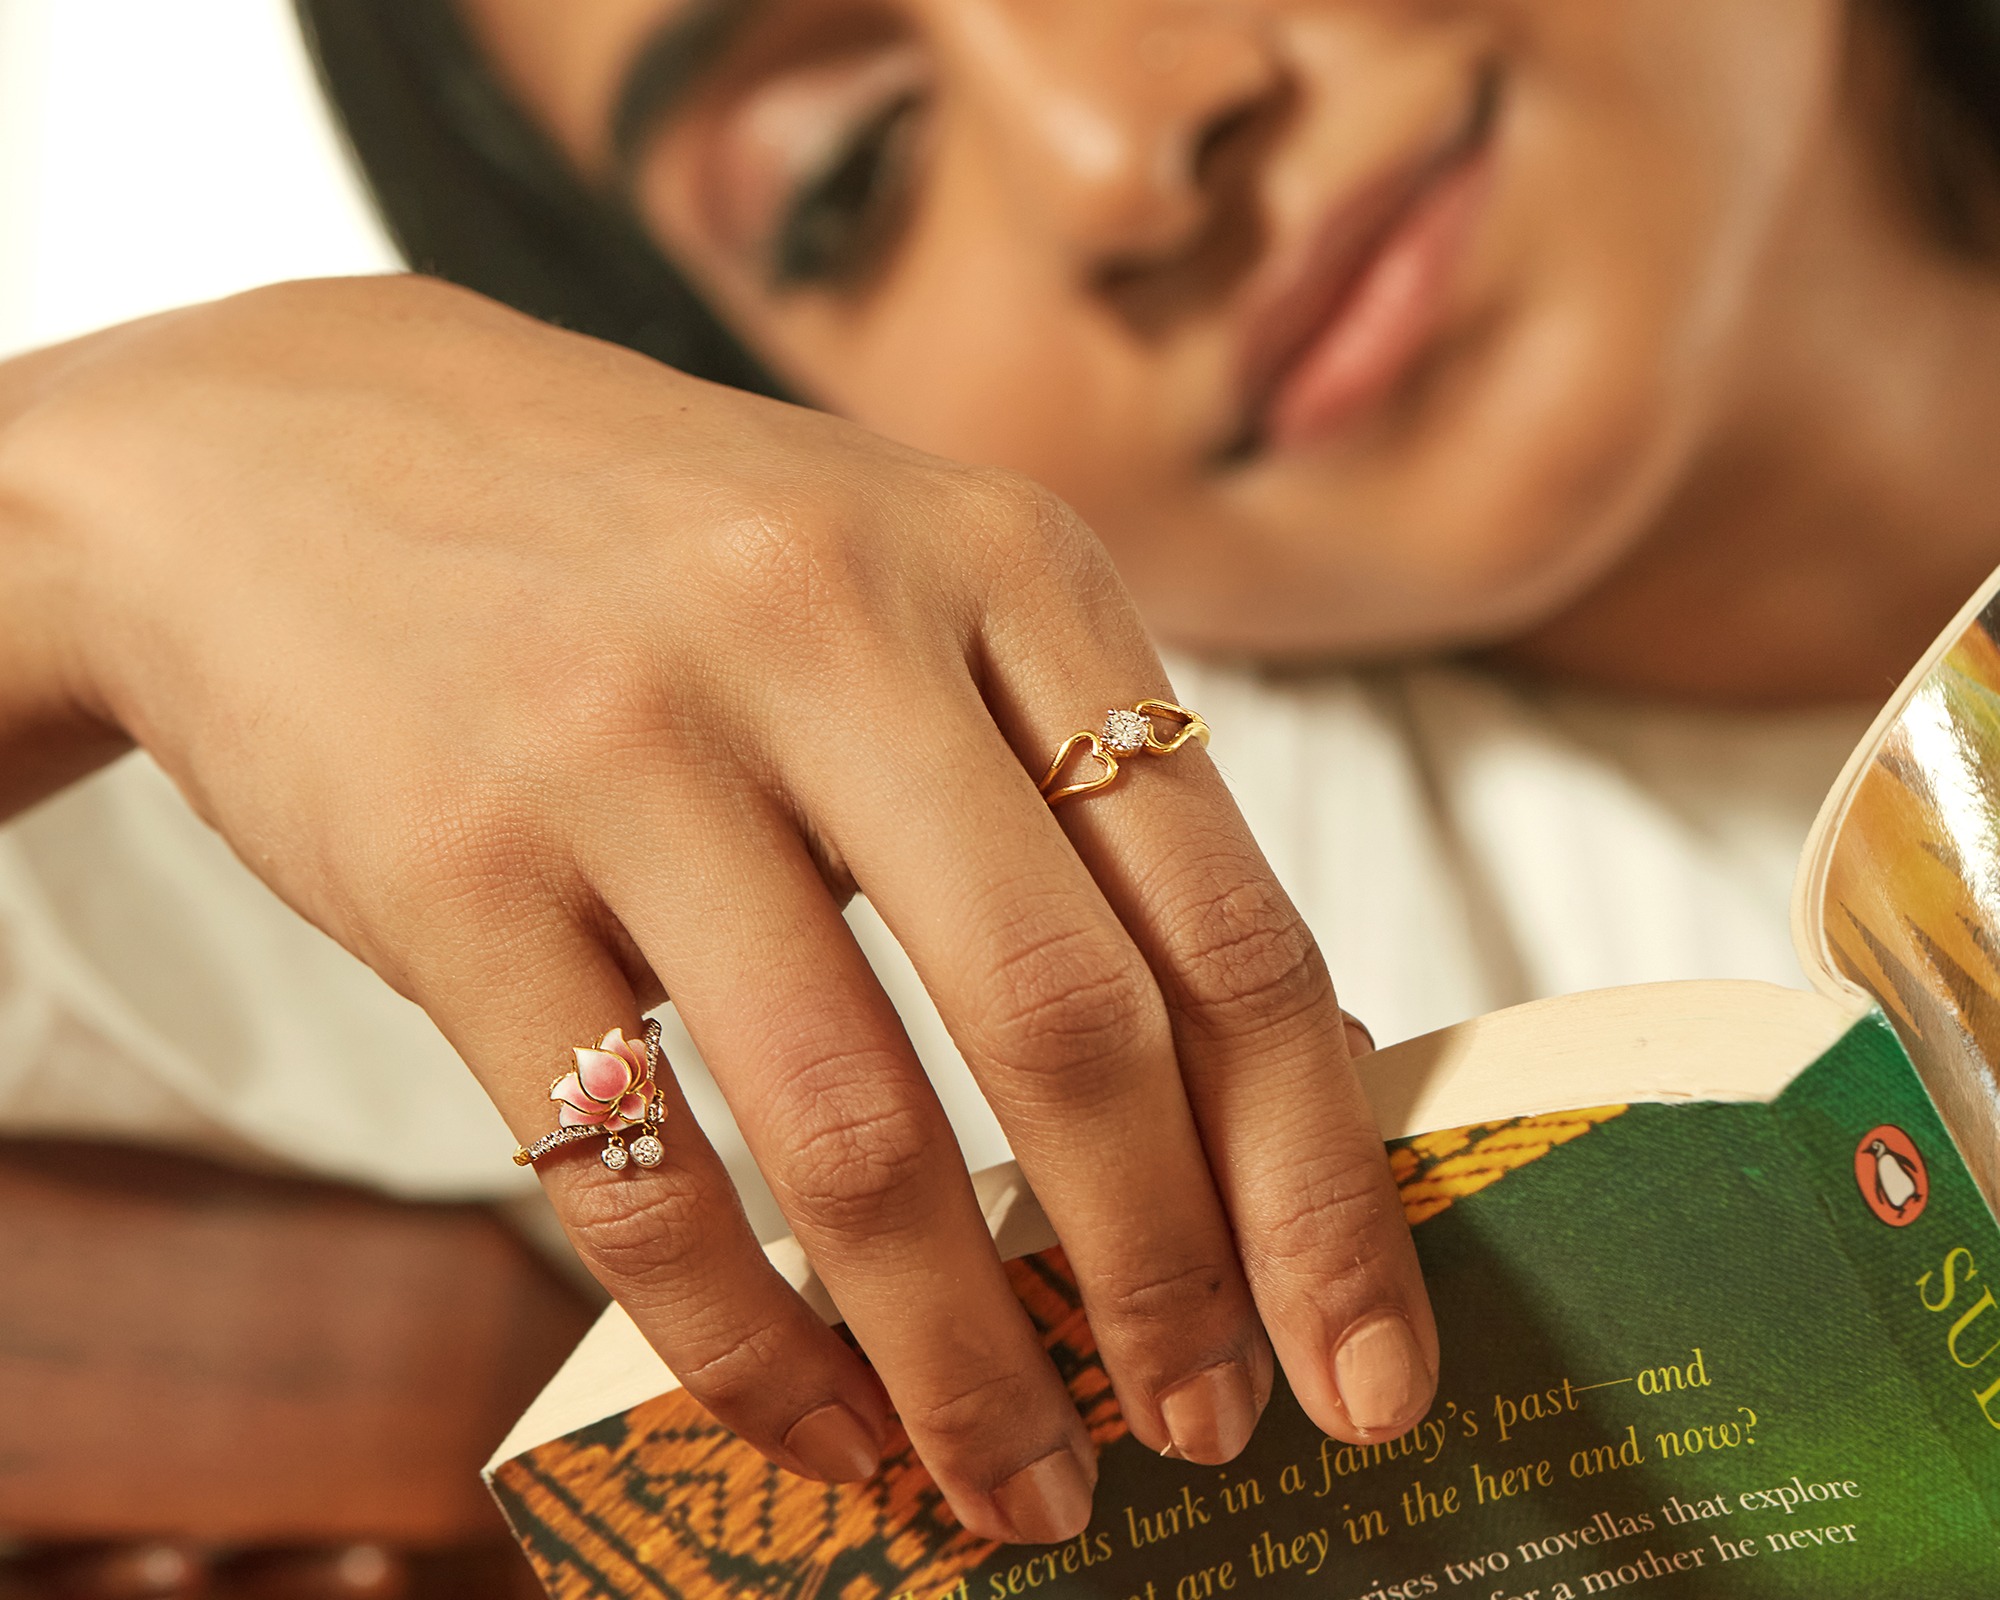 This ring is a perfect... - CaratLane: A Tanishq Partnership | Facebook